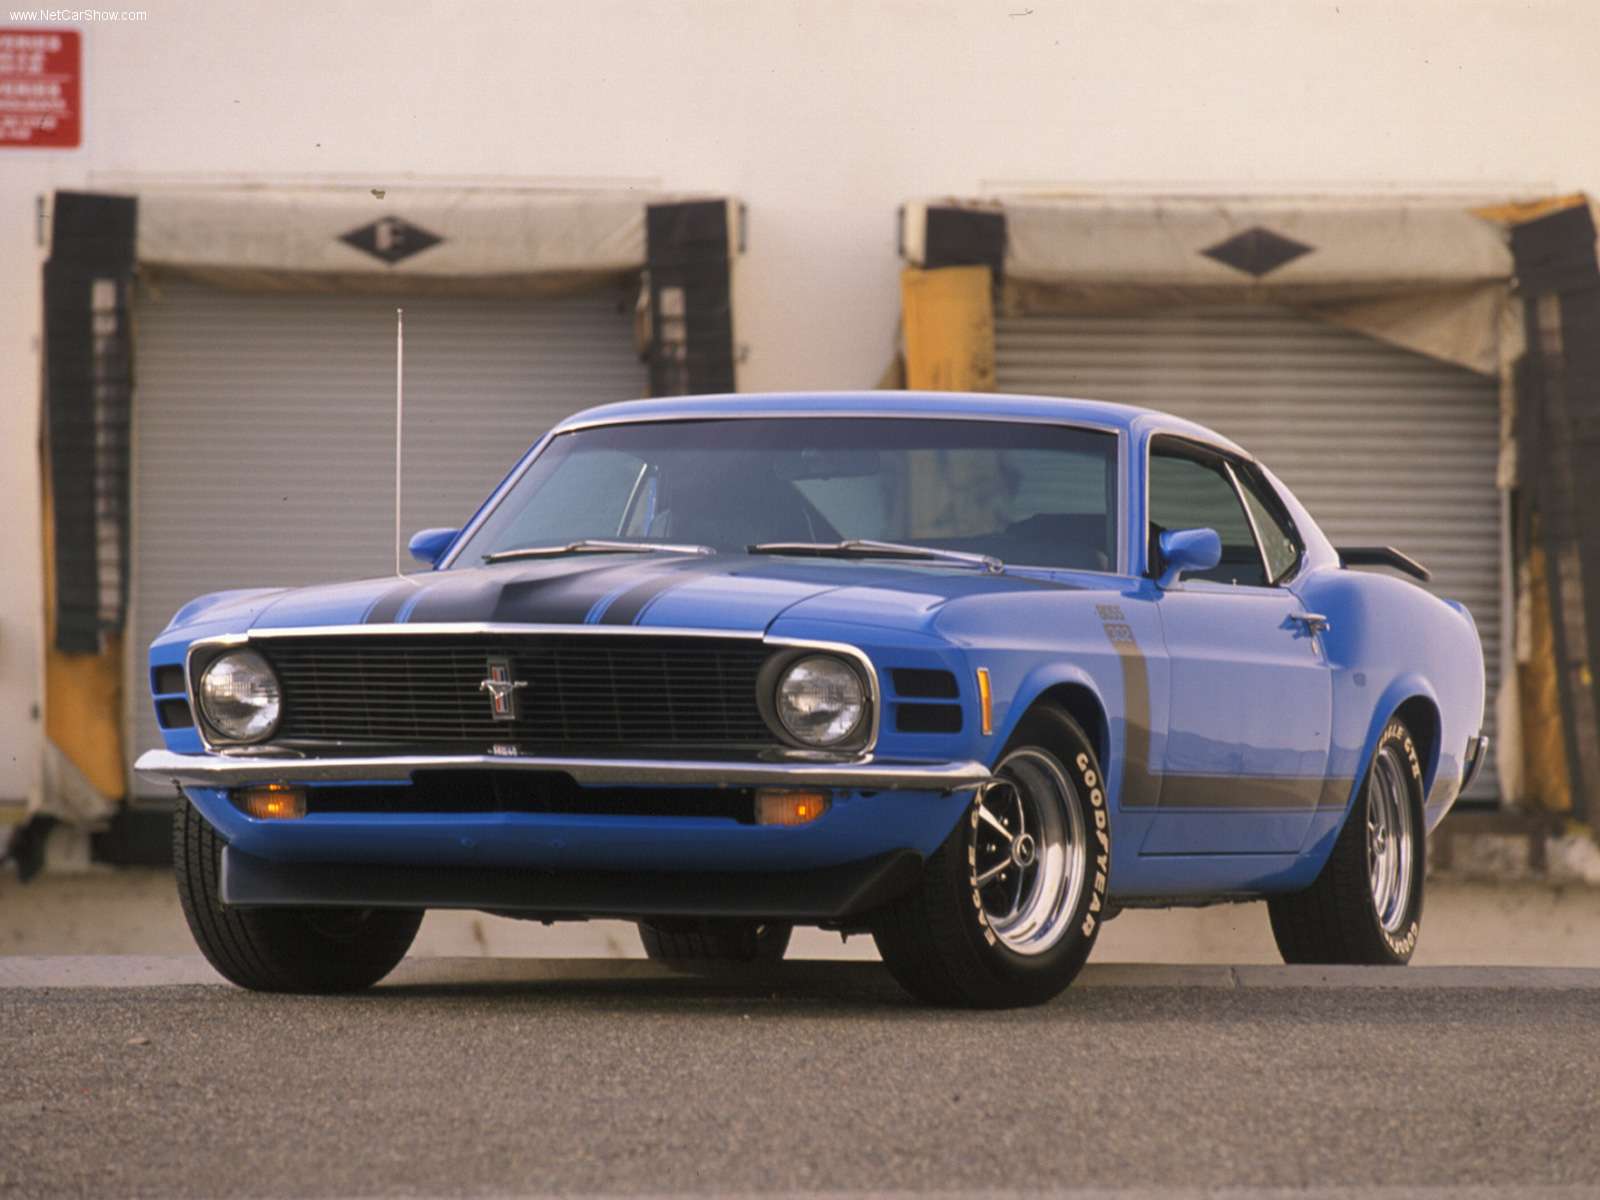 1970 Ford Mustang Boss 302 Wallpapers   Car Wallpapers